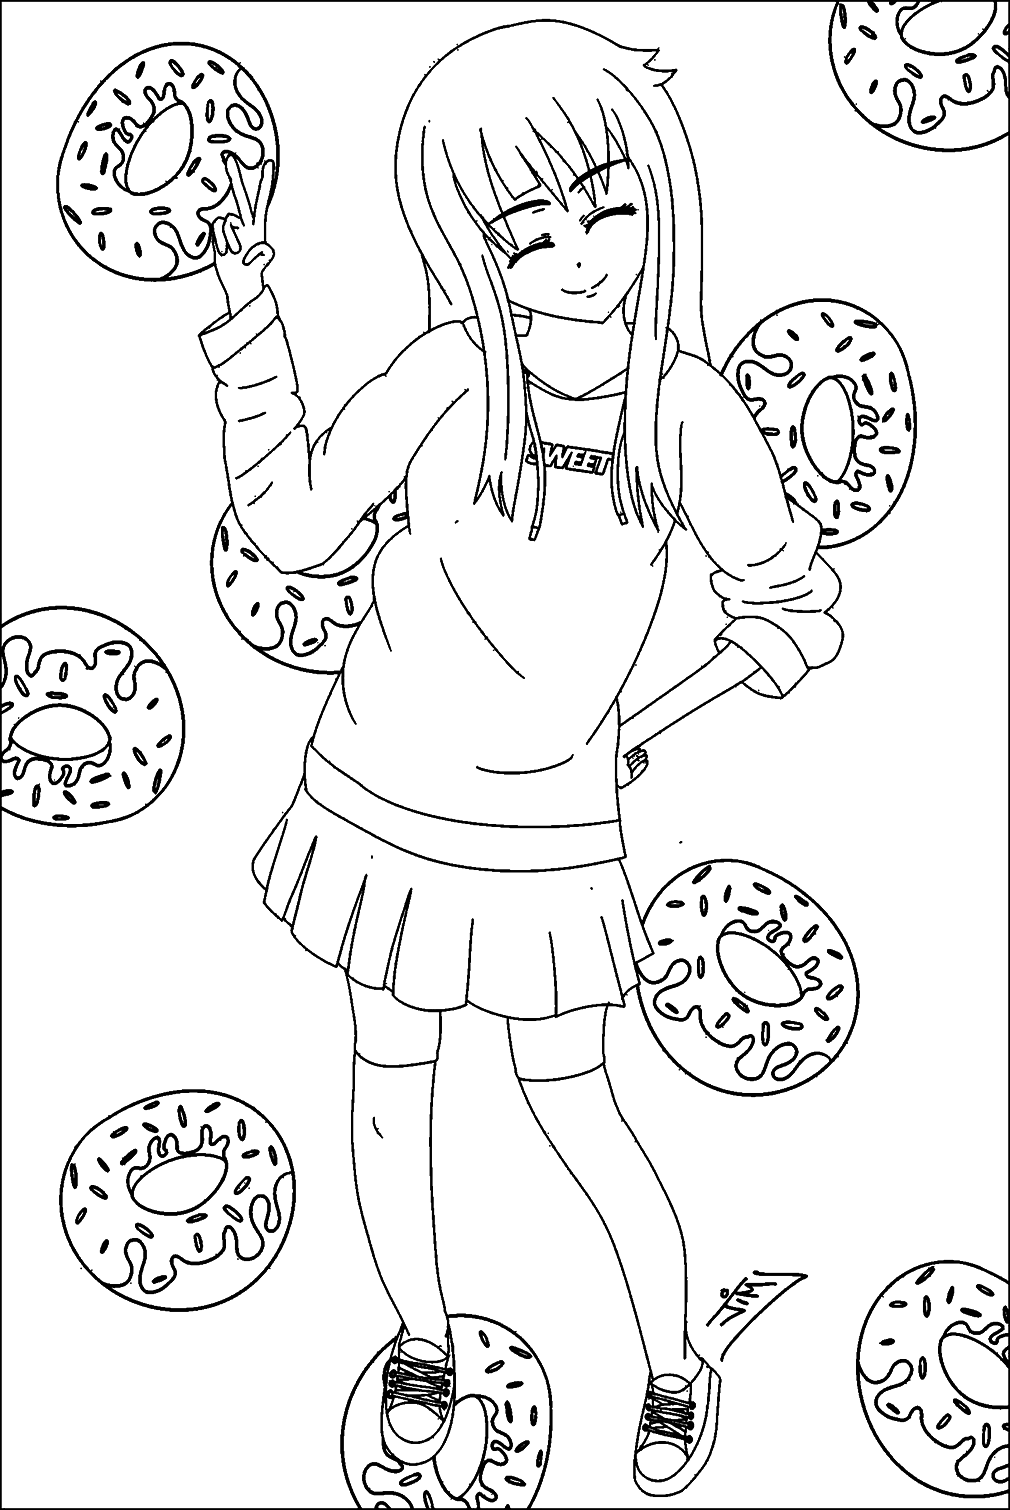 Donut Coloring Page Printable Coloring Page